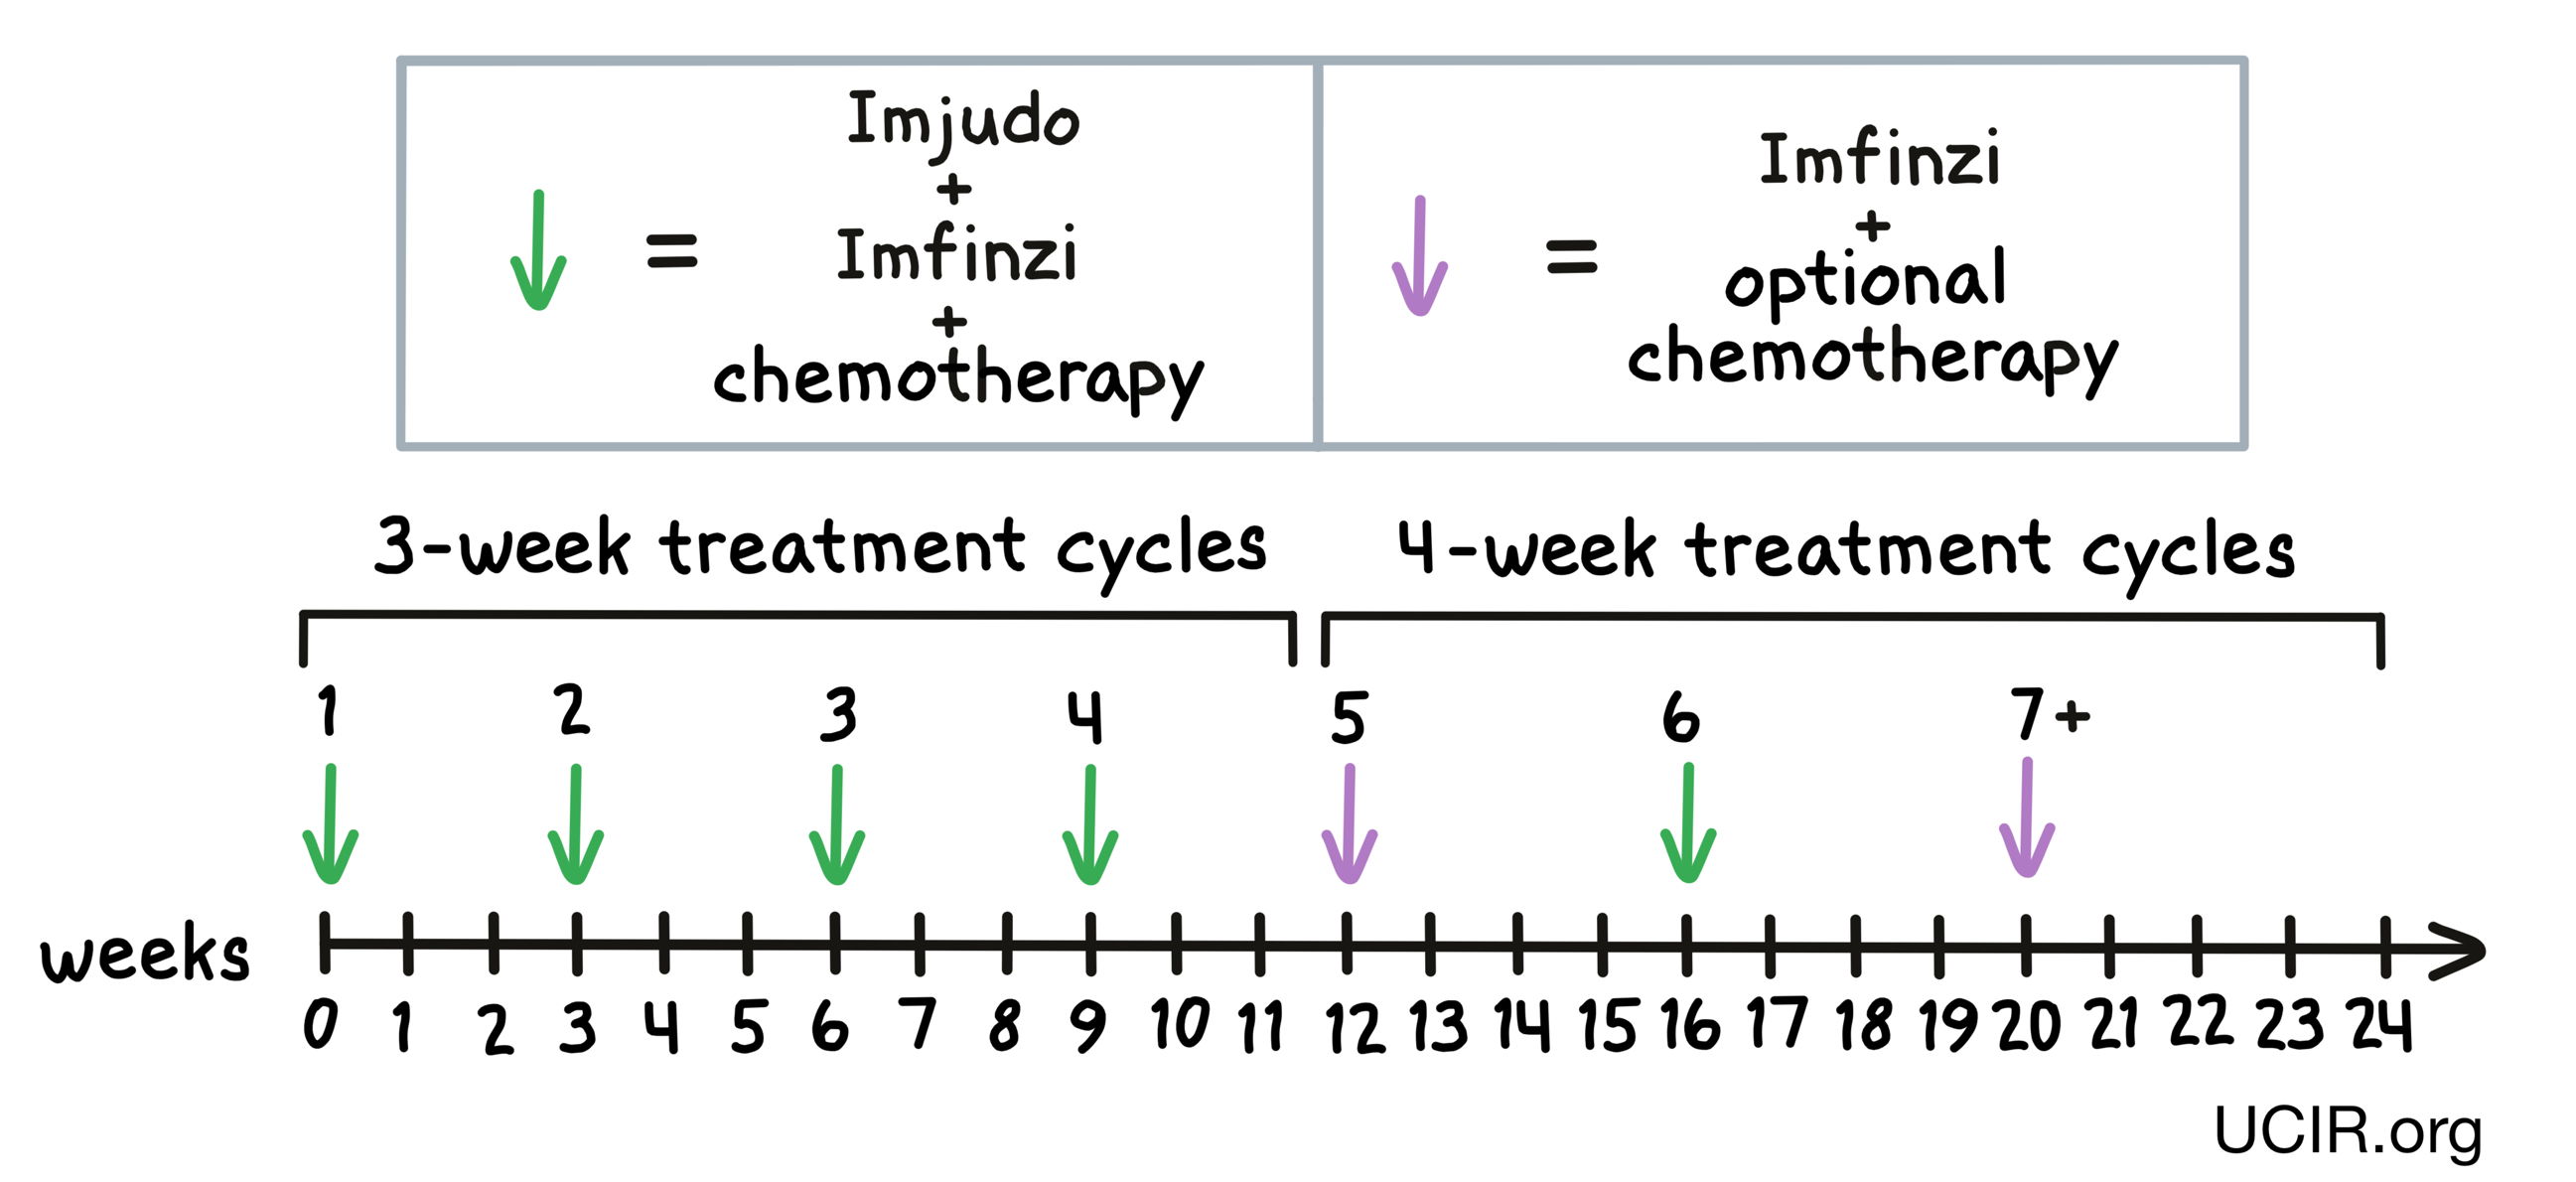 Illustration showing how Imfinzi is administered to patients